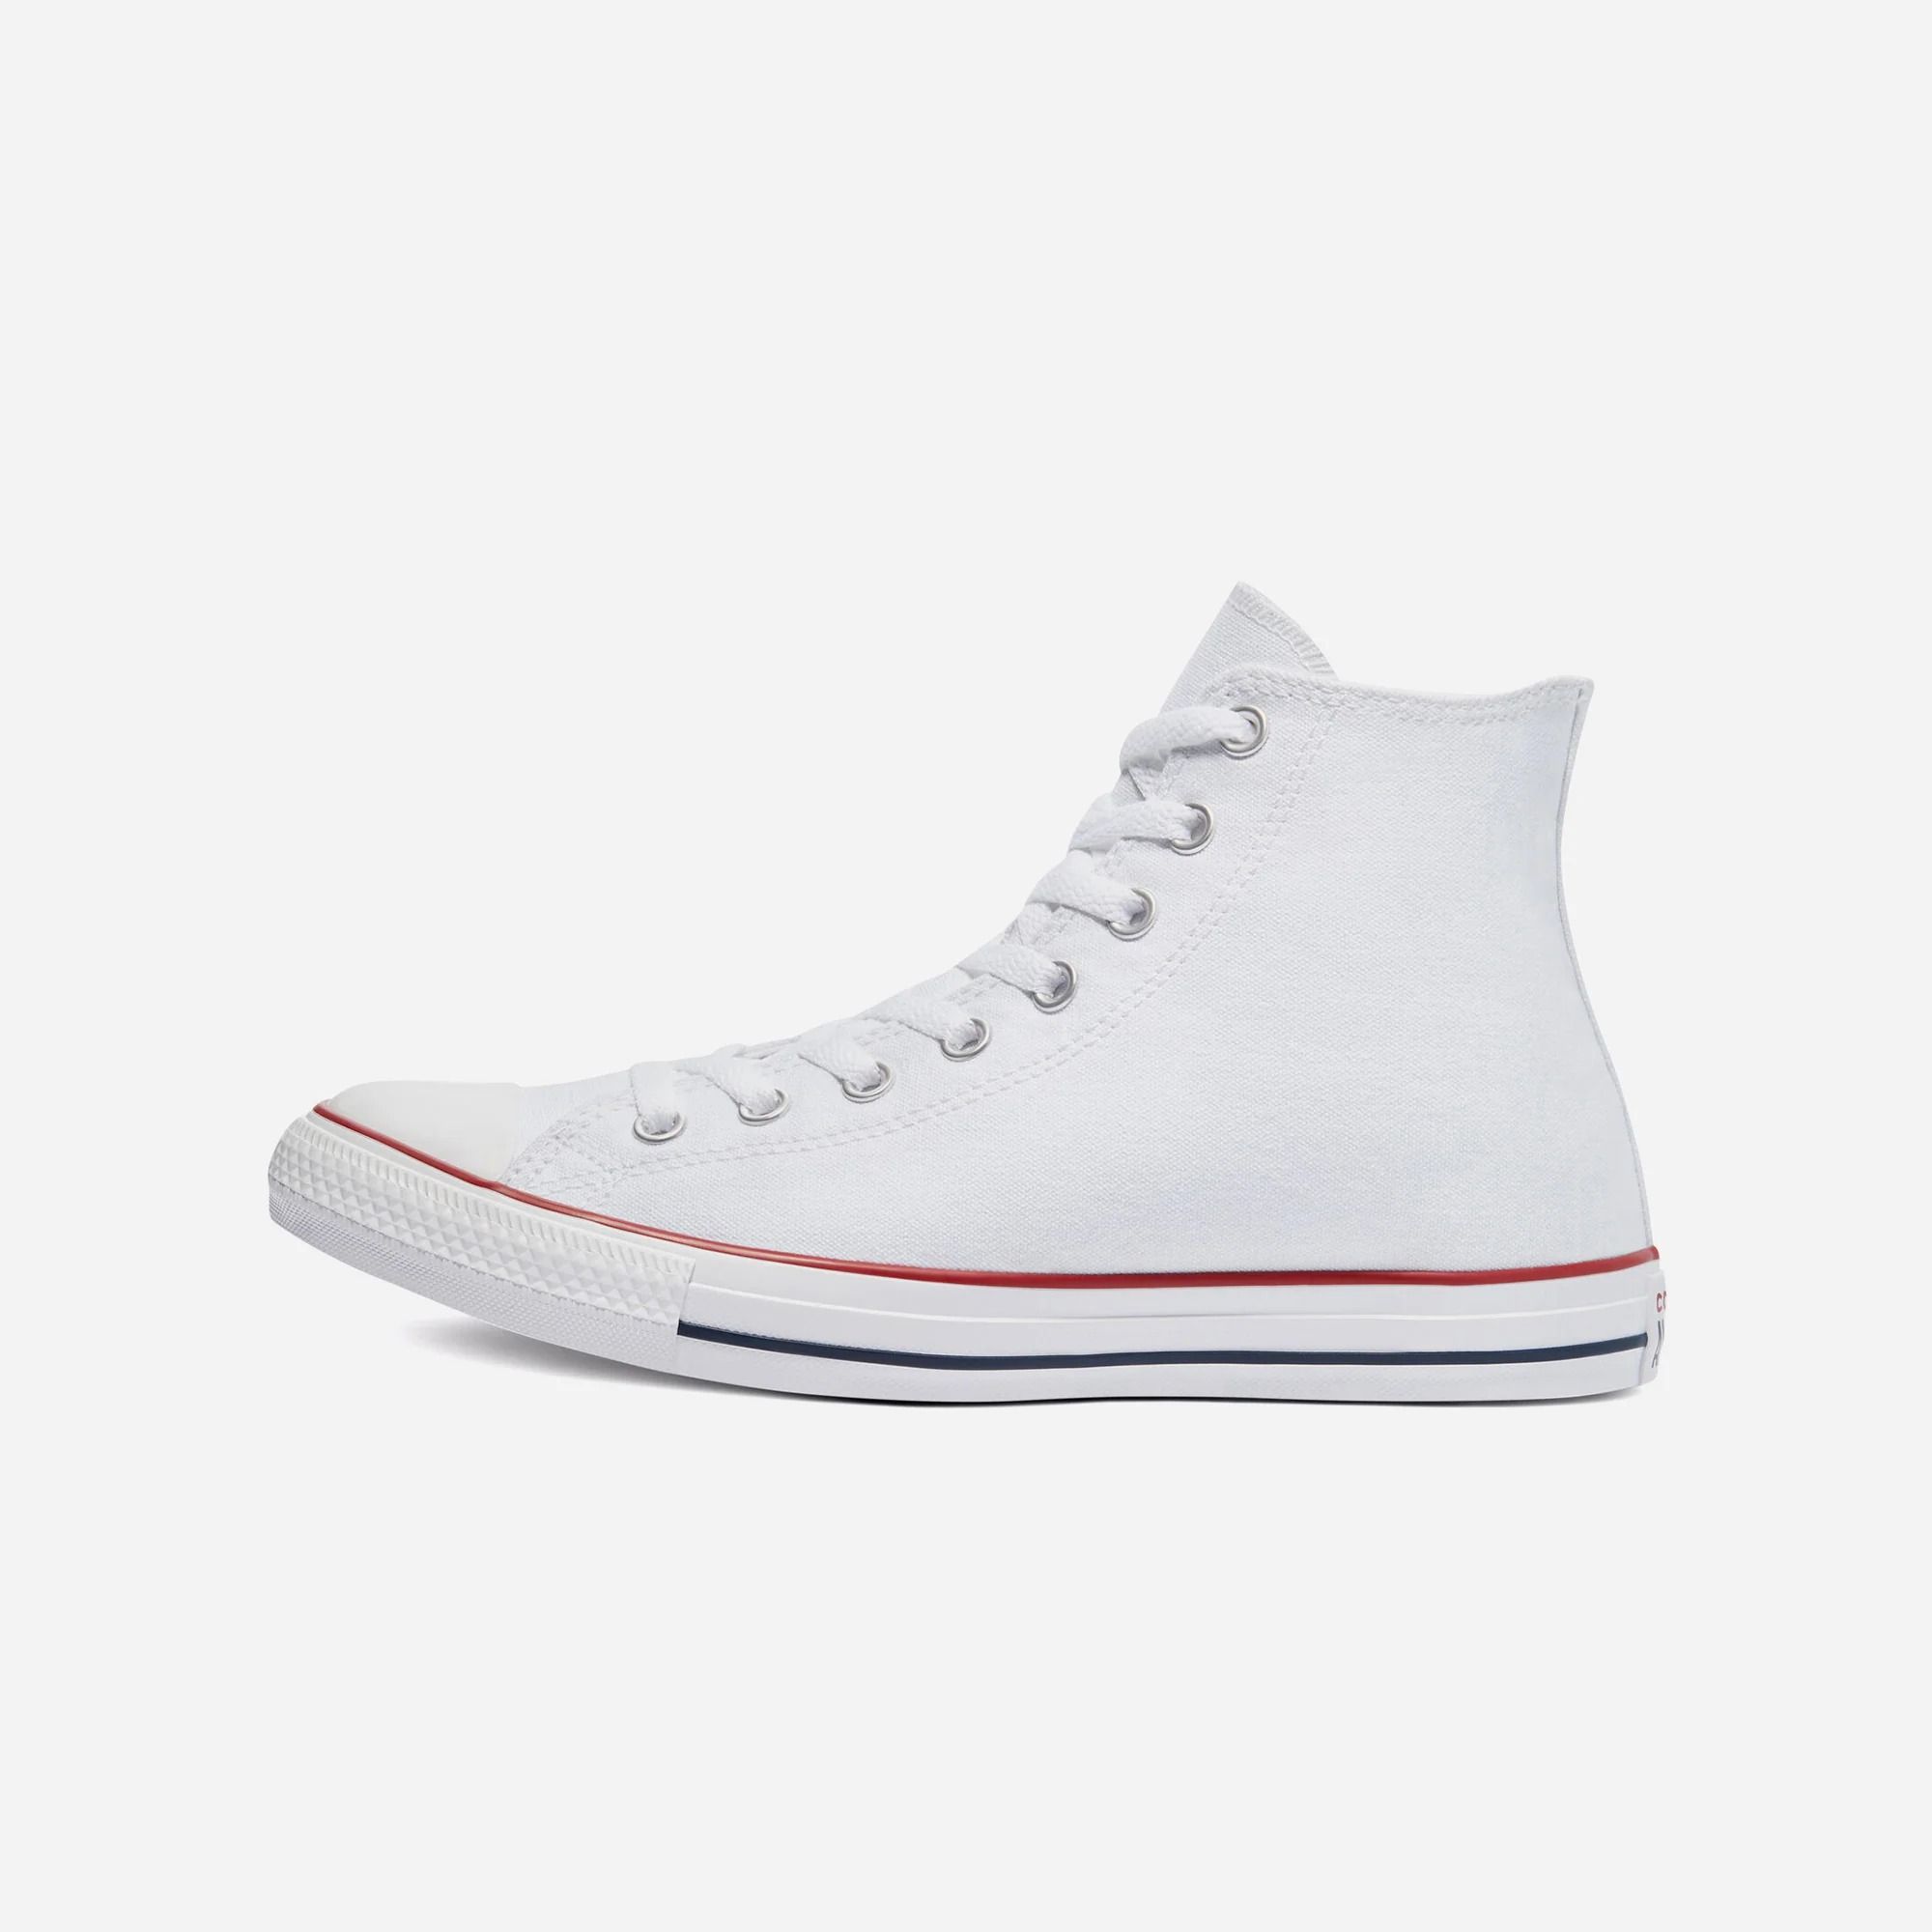  Giày Thể Thao Unisex CONVERSE Chuck Taylor All Star Classic M7650C 